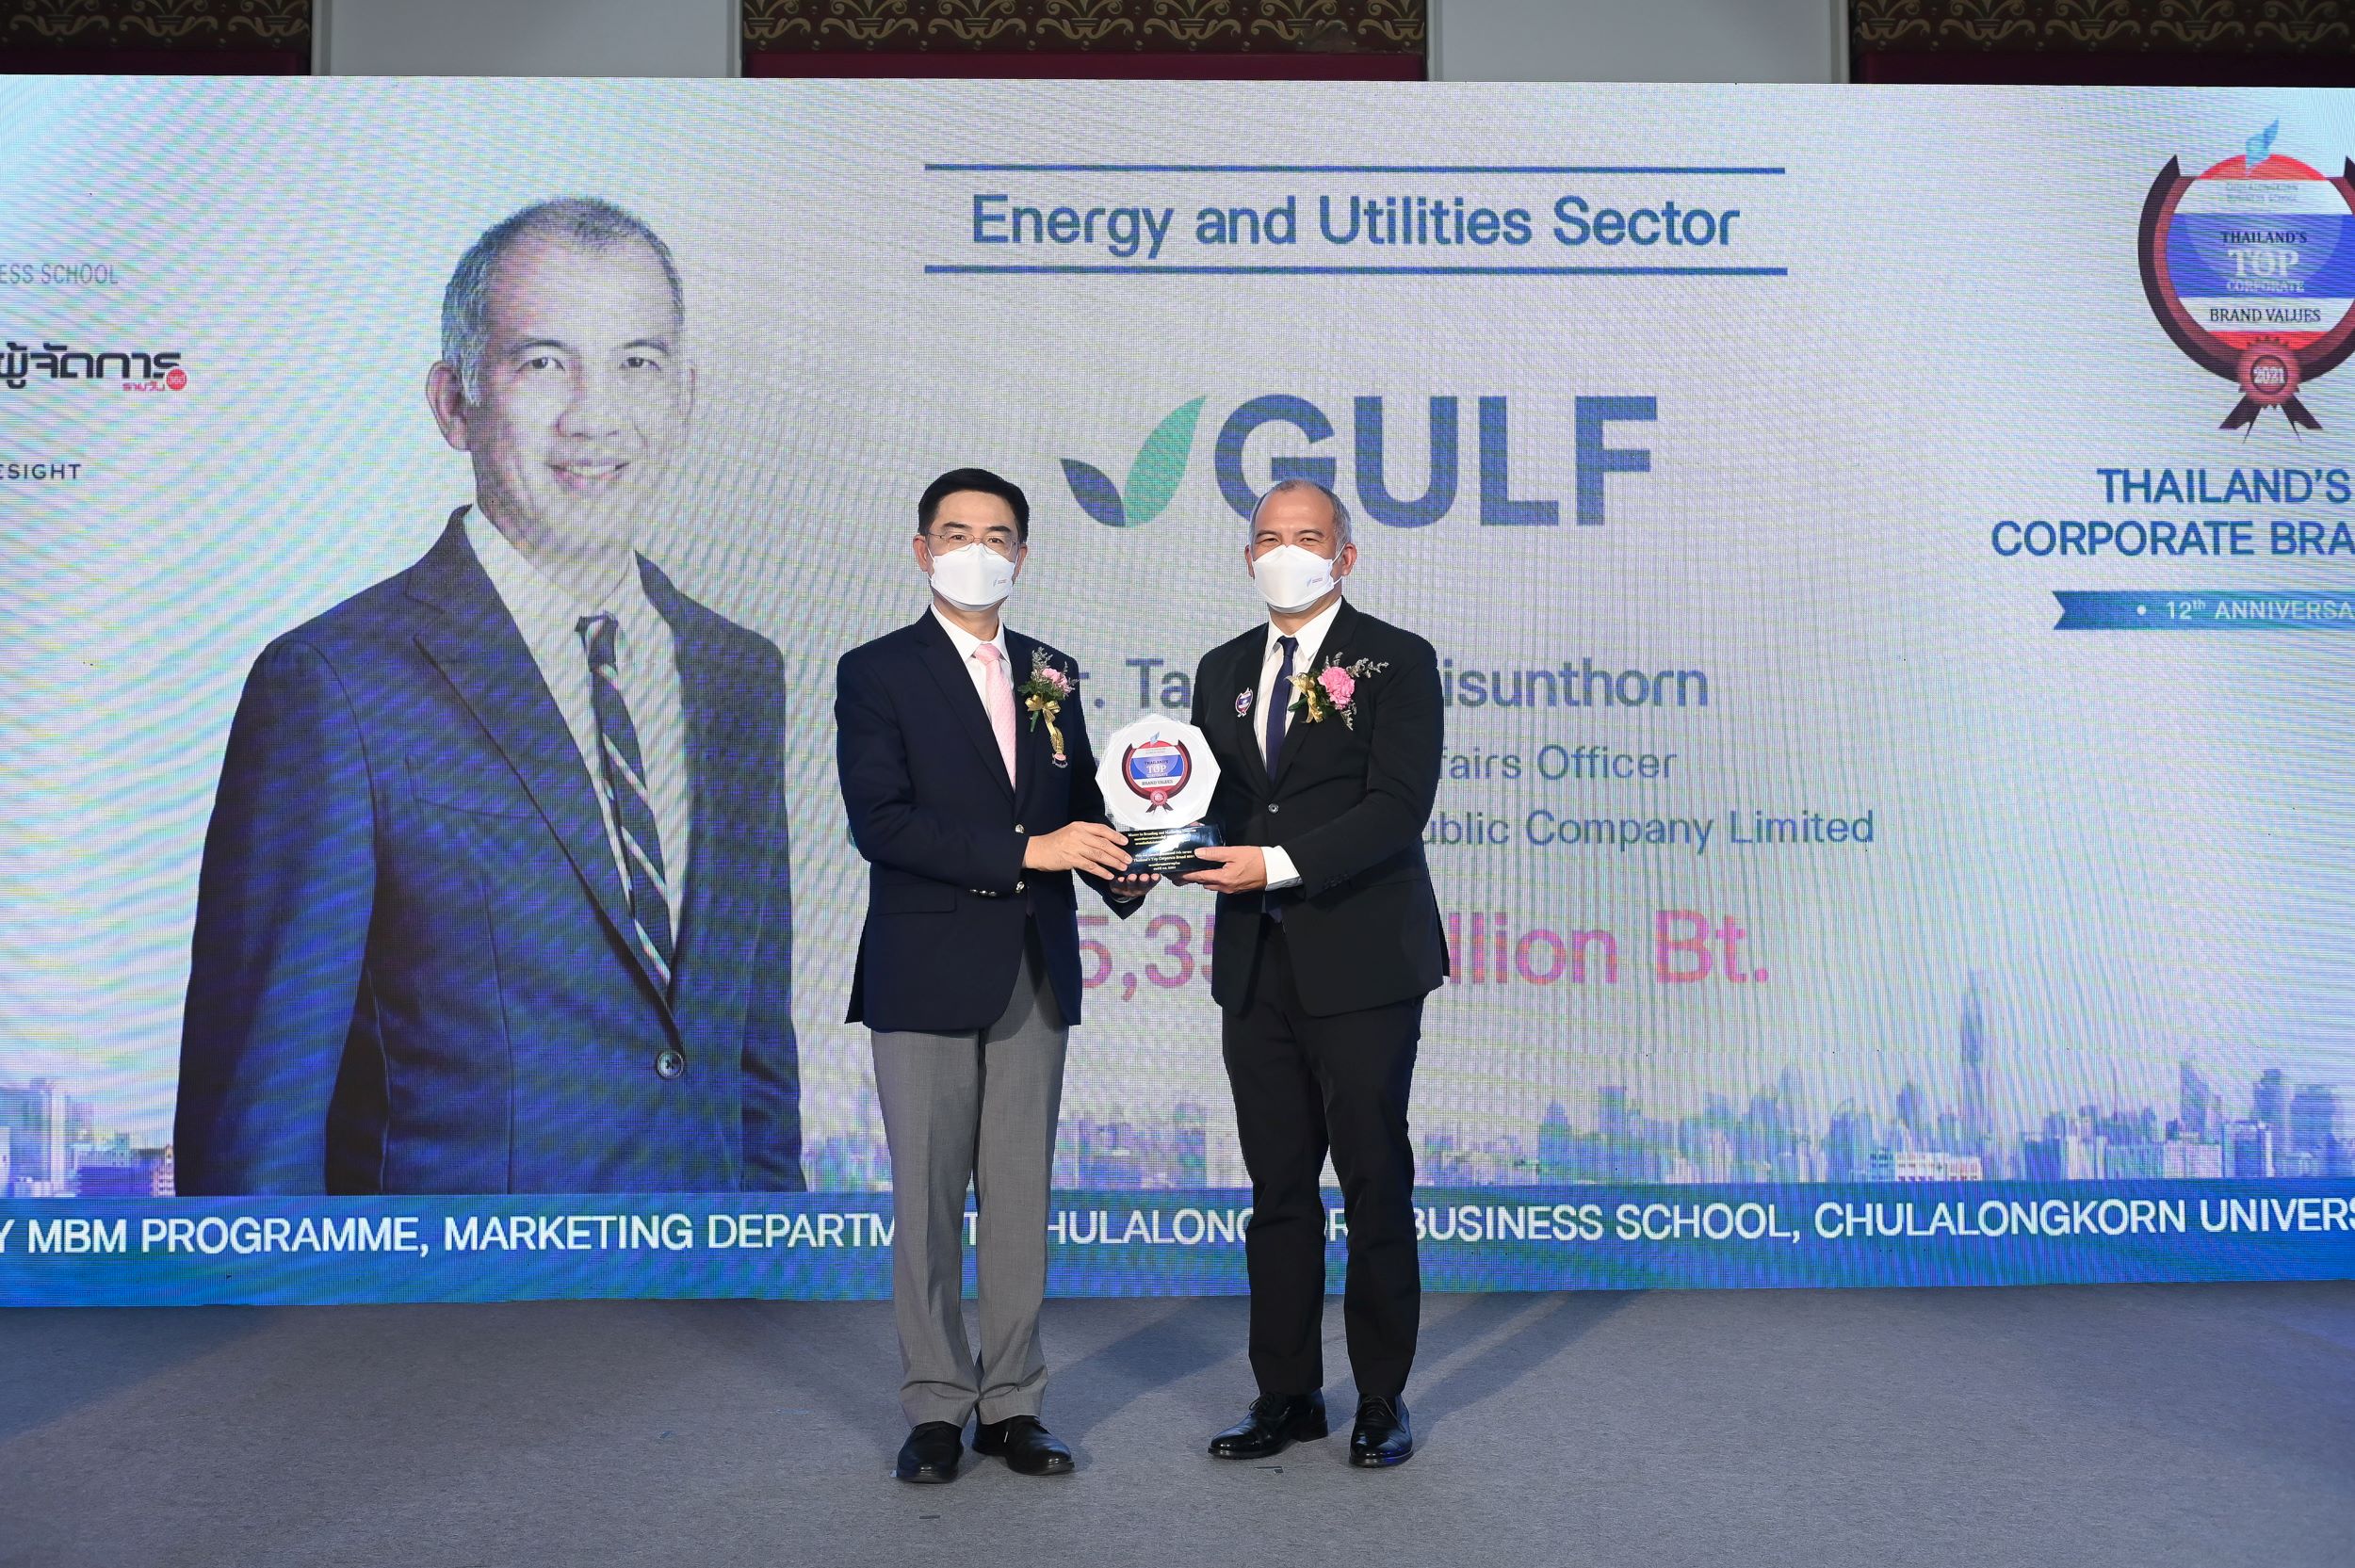 GULF wins prestigious award from ASEAN and Thailand's Top Corporate Brands 2021